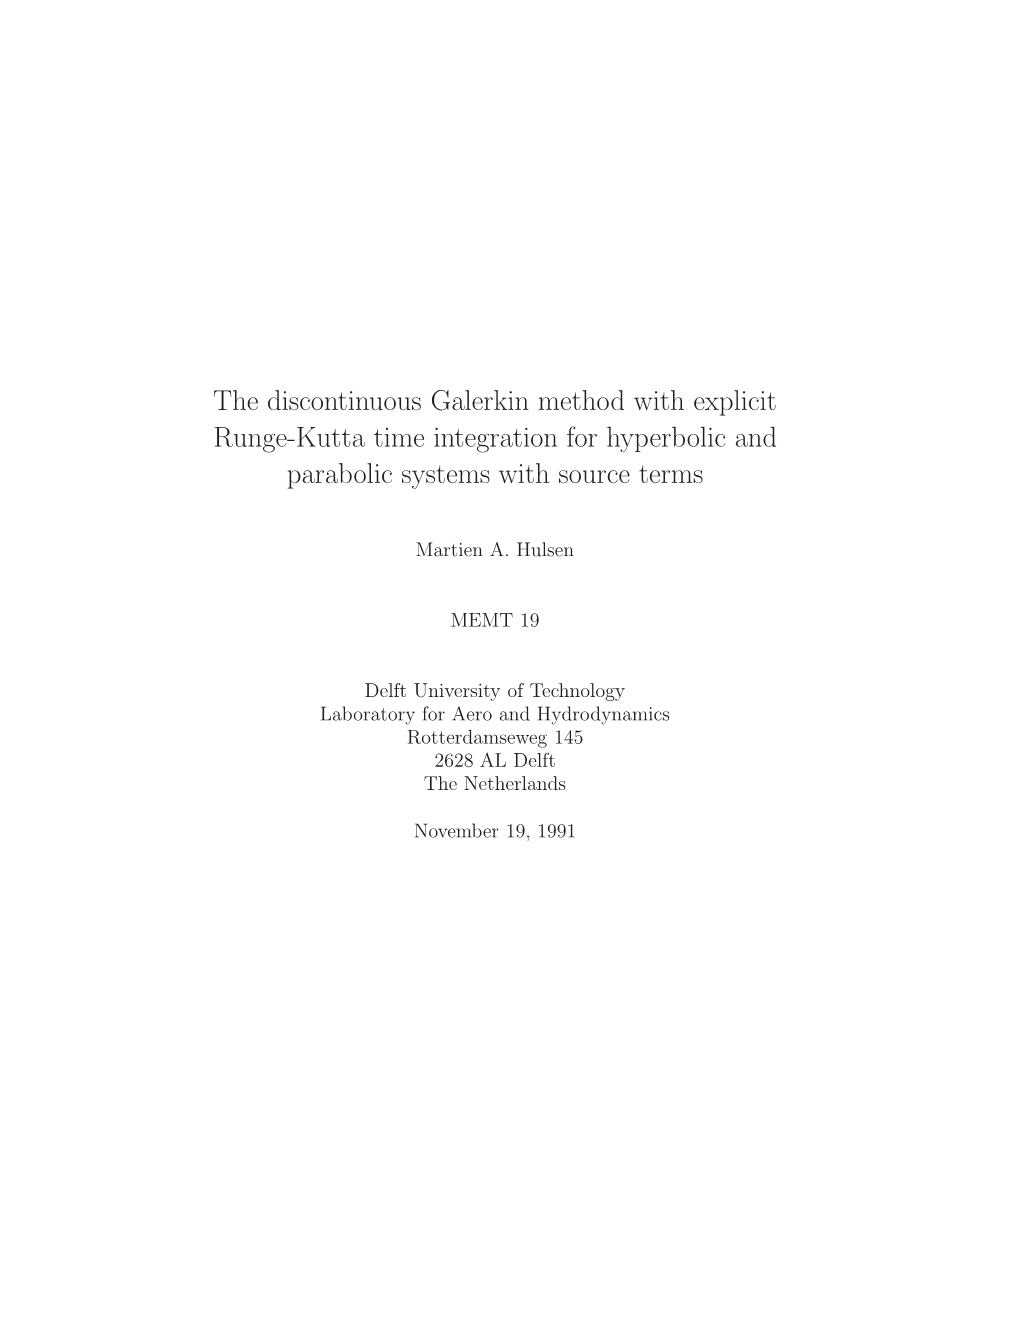 The Discontinuous Galerkin Method with Explicit Runge-Kutta Time Integration for Hyperbolic and Parabolic Systems with Source Terms